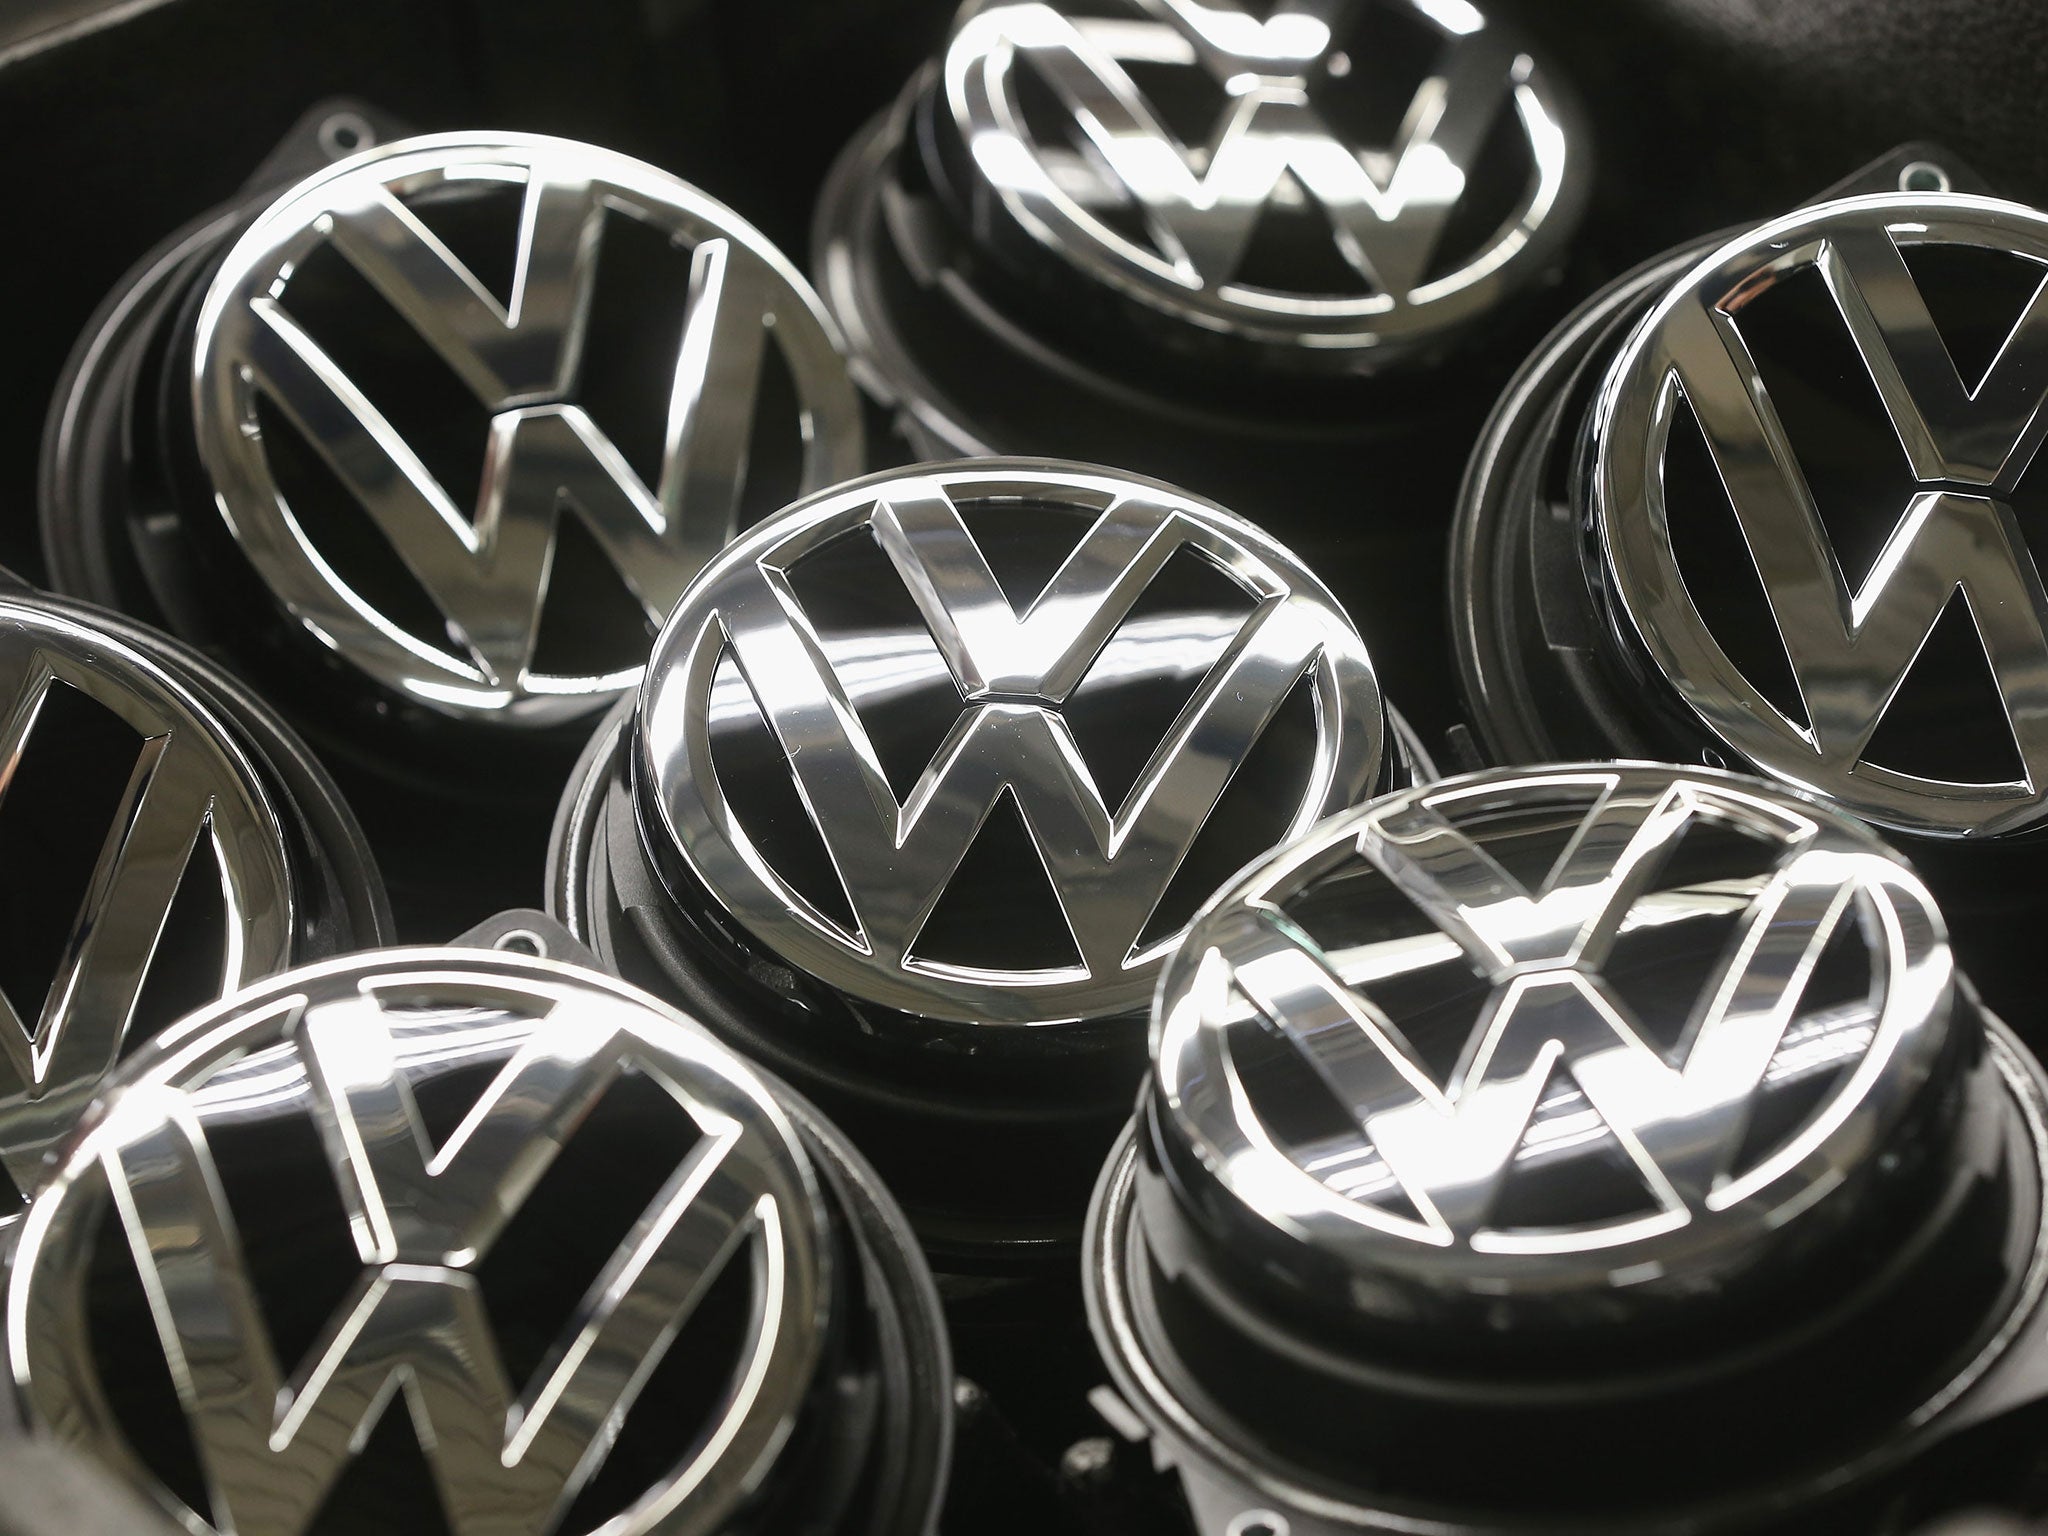 Volkswagen employees have filed a civil law suit against the company for actions during the Brazil military dictatorship